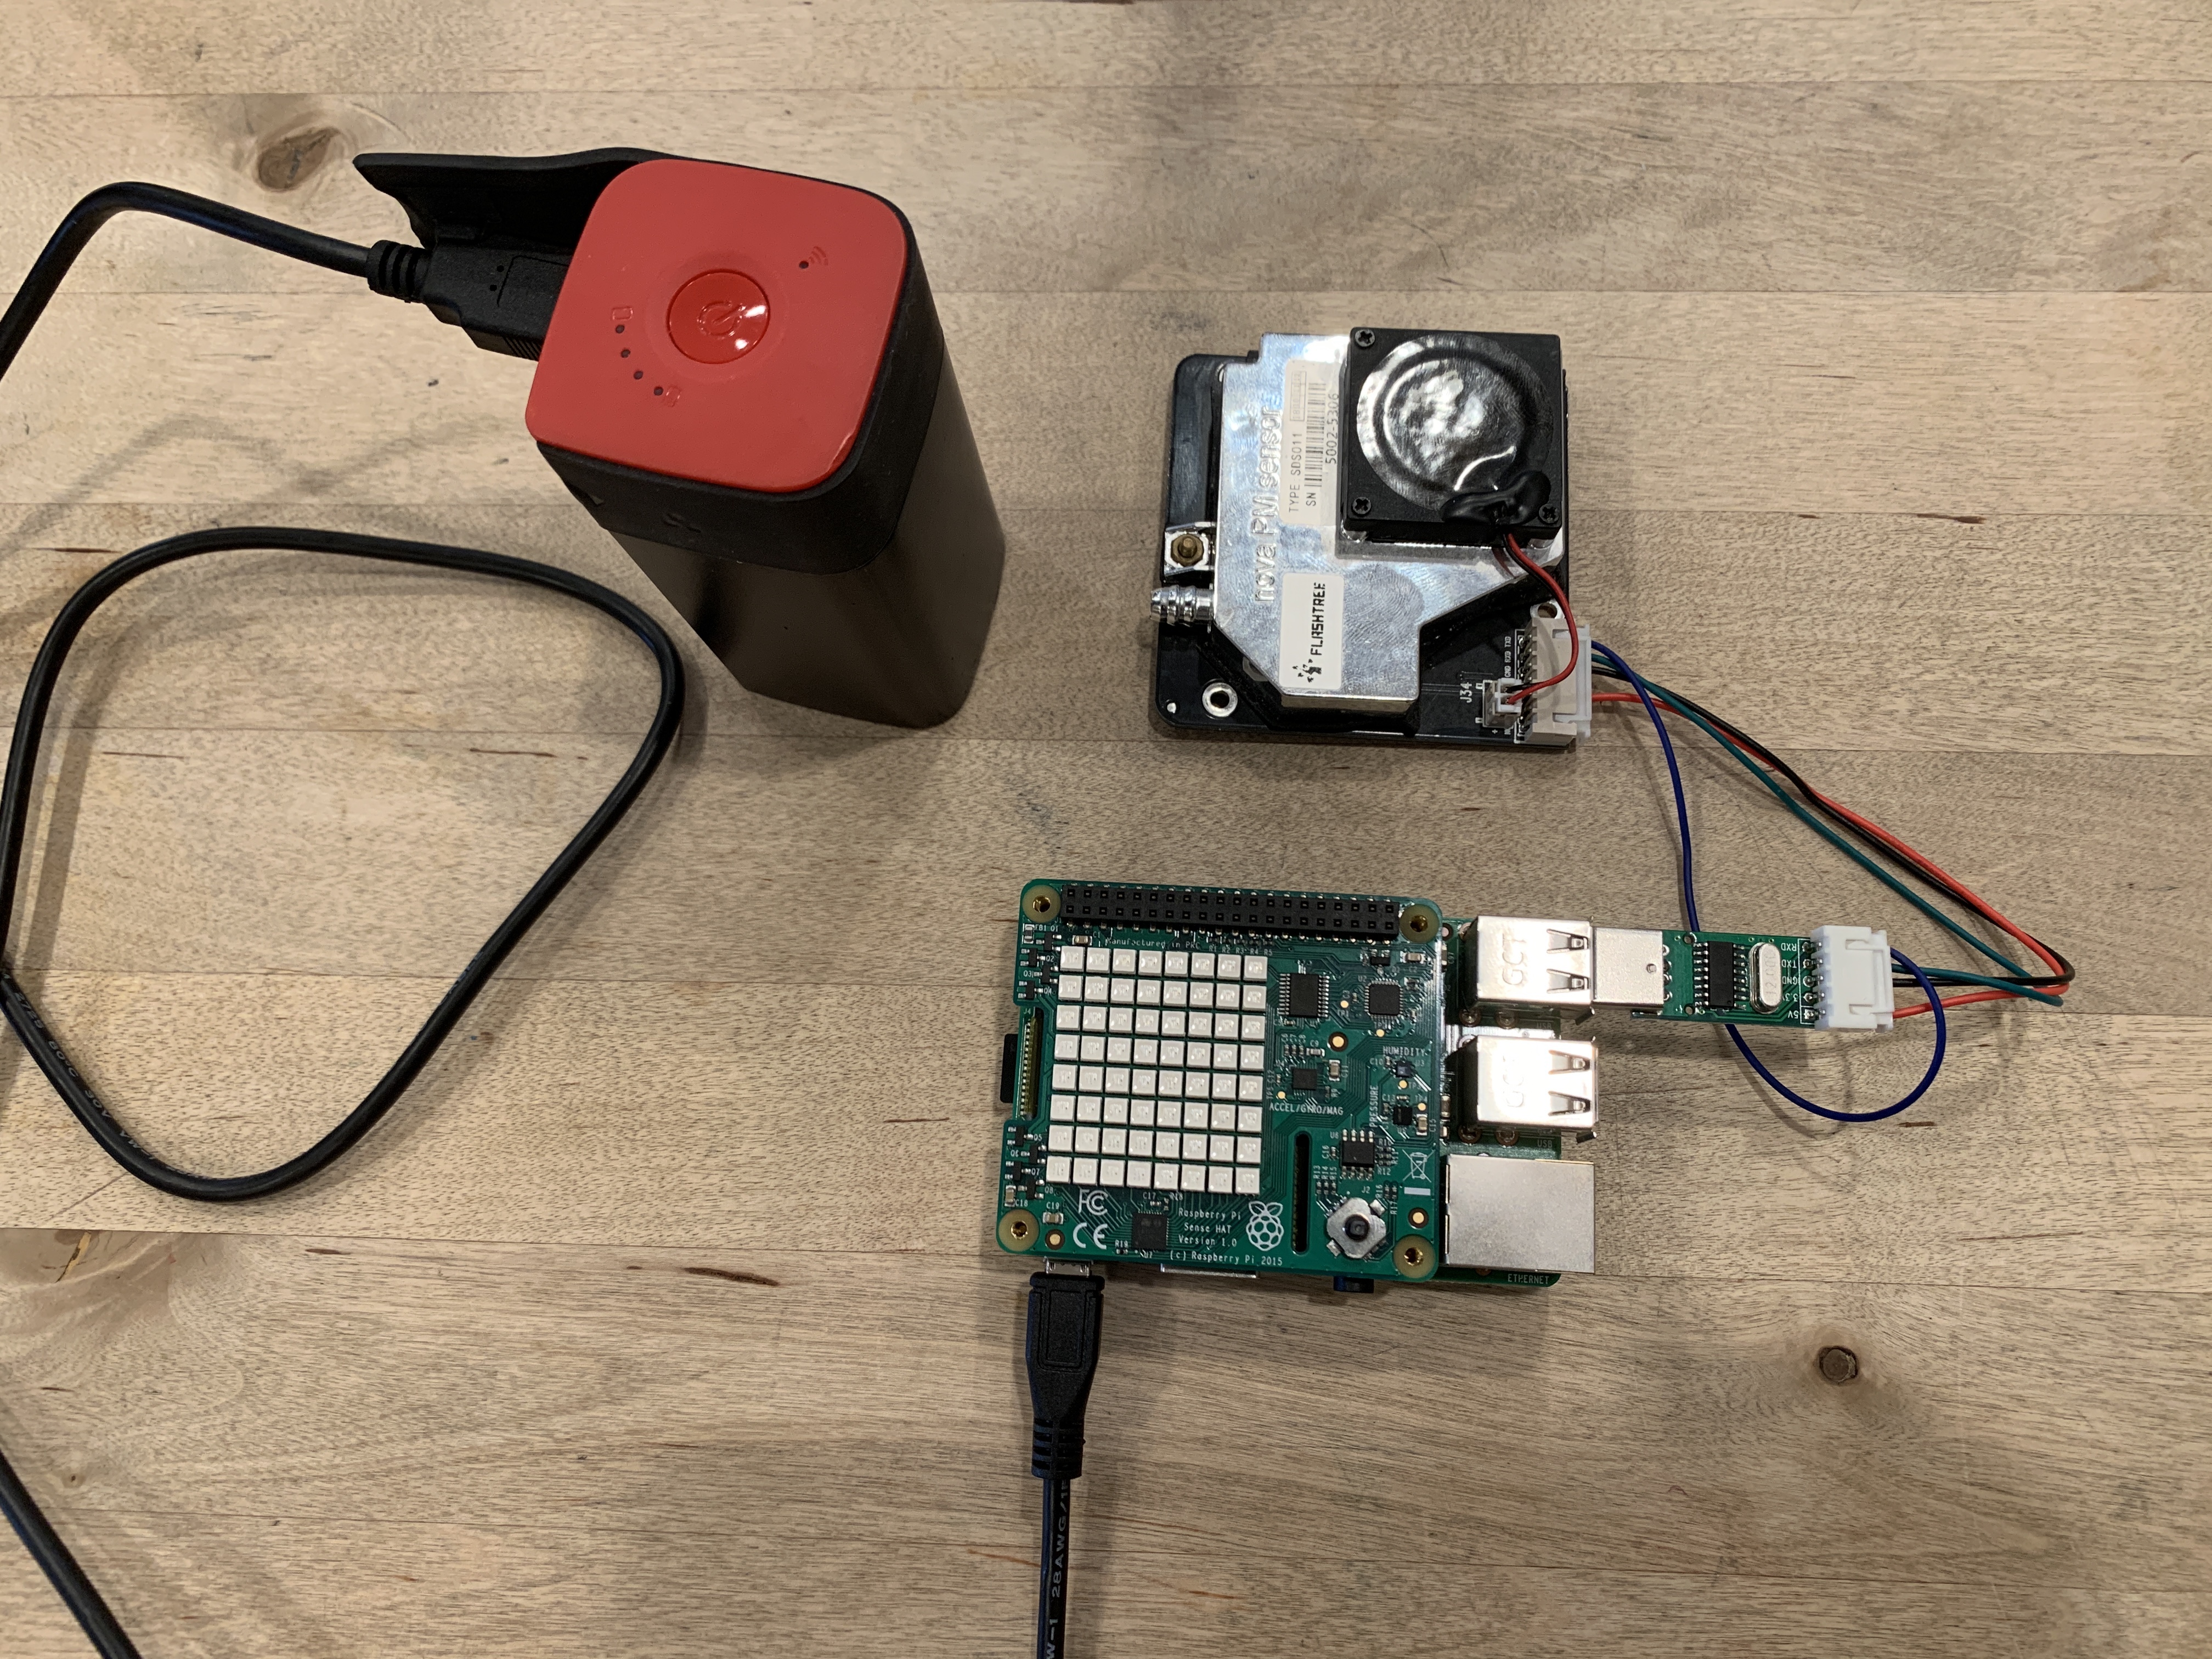 Raspberry pi with particle matter sensor and power bank